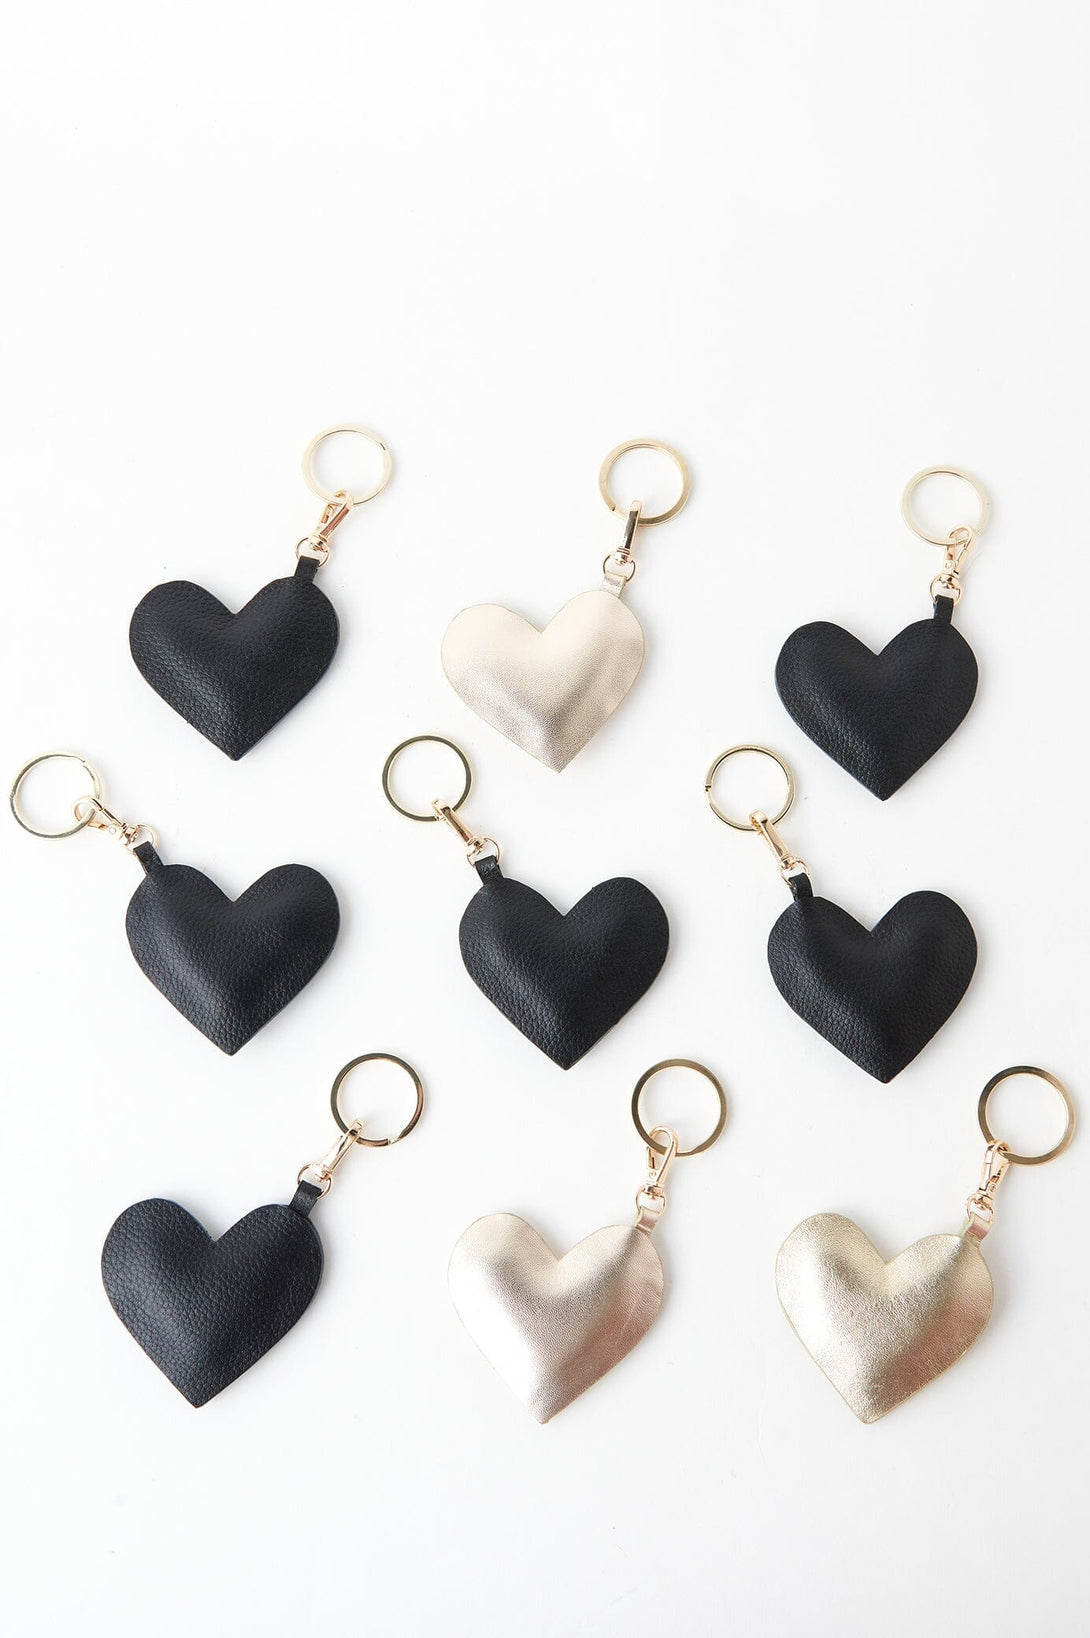 Heart Keyring Soft Leather Black Accessories